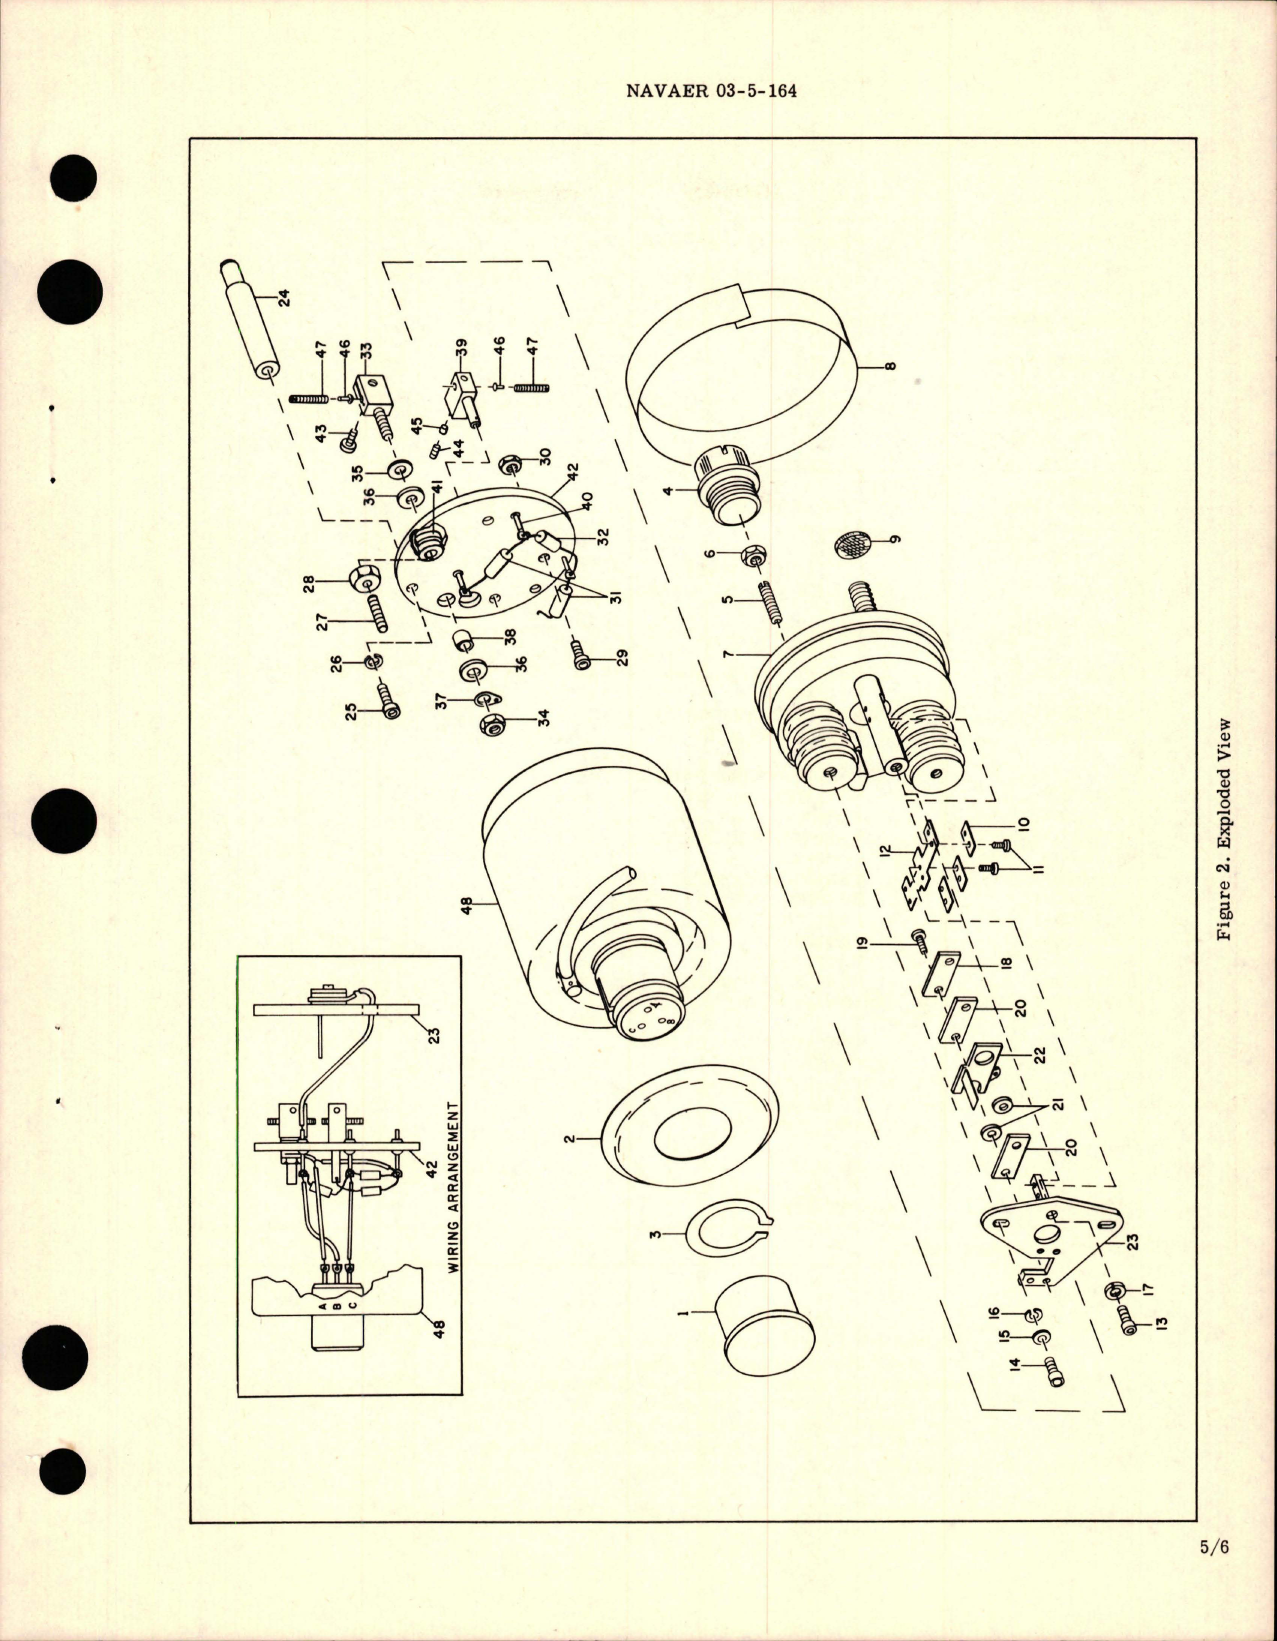 Sample page 5 from AirCorps Library document: Overhaul Instructions with Parts Breakdown for Engine Oil Pressure Switch - Type 3153-3A-250 